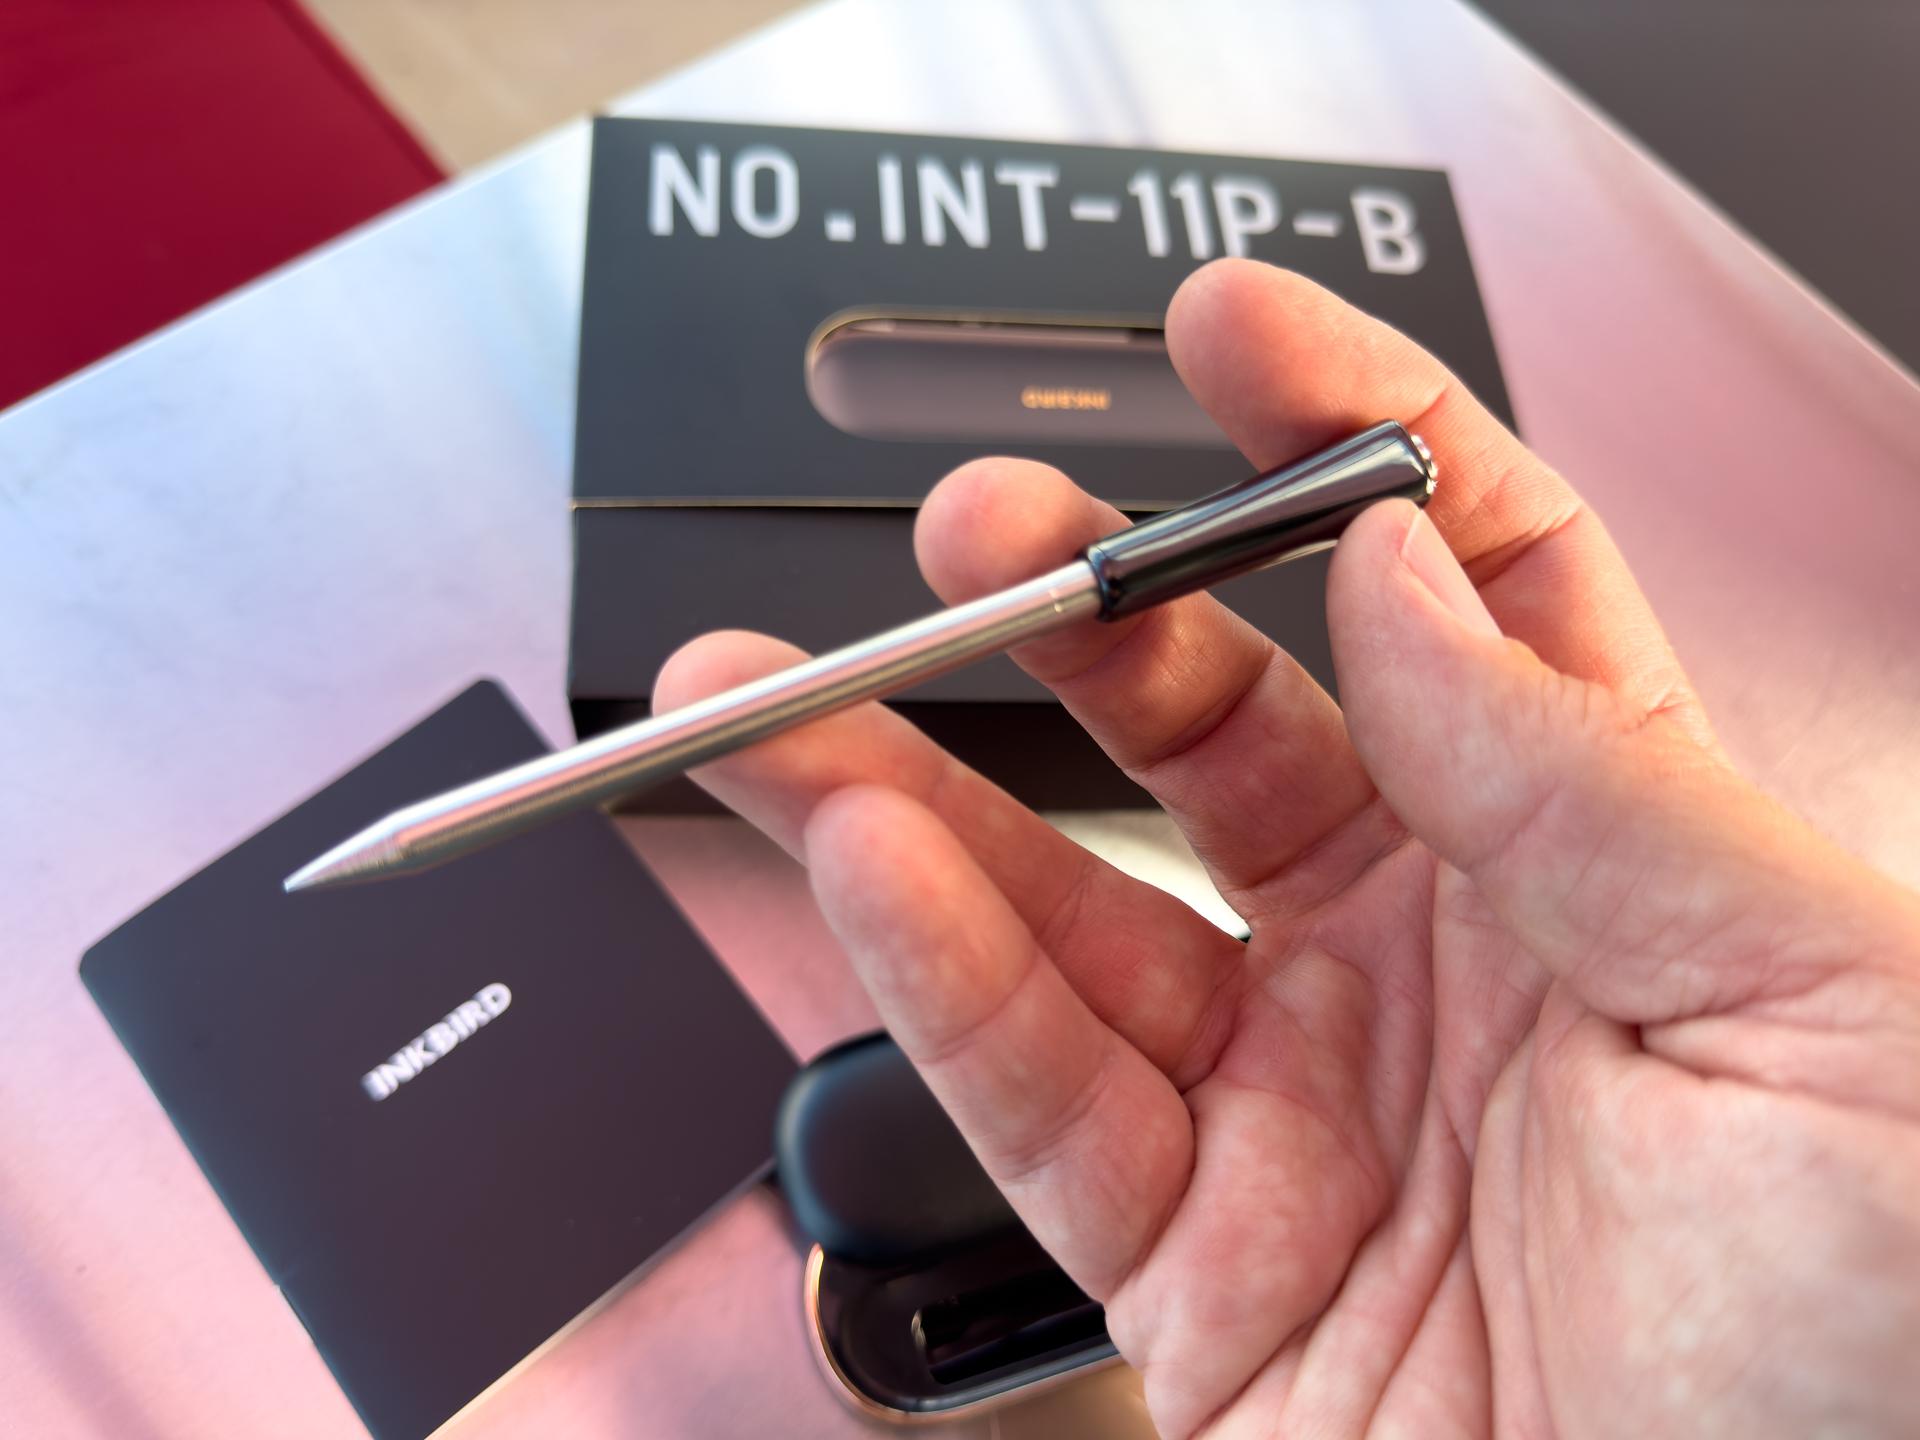 INKBIRD INT-11P-B Wireless Meat Thermometer Review & Test - Share & Tips -  INKBIRD Community